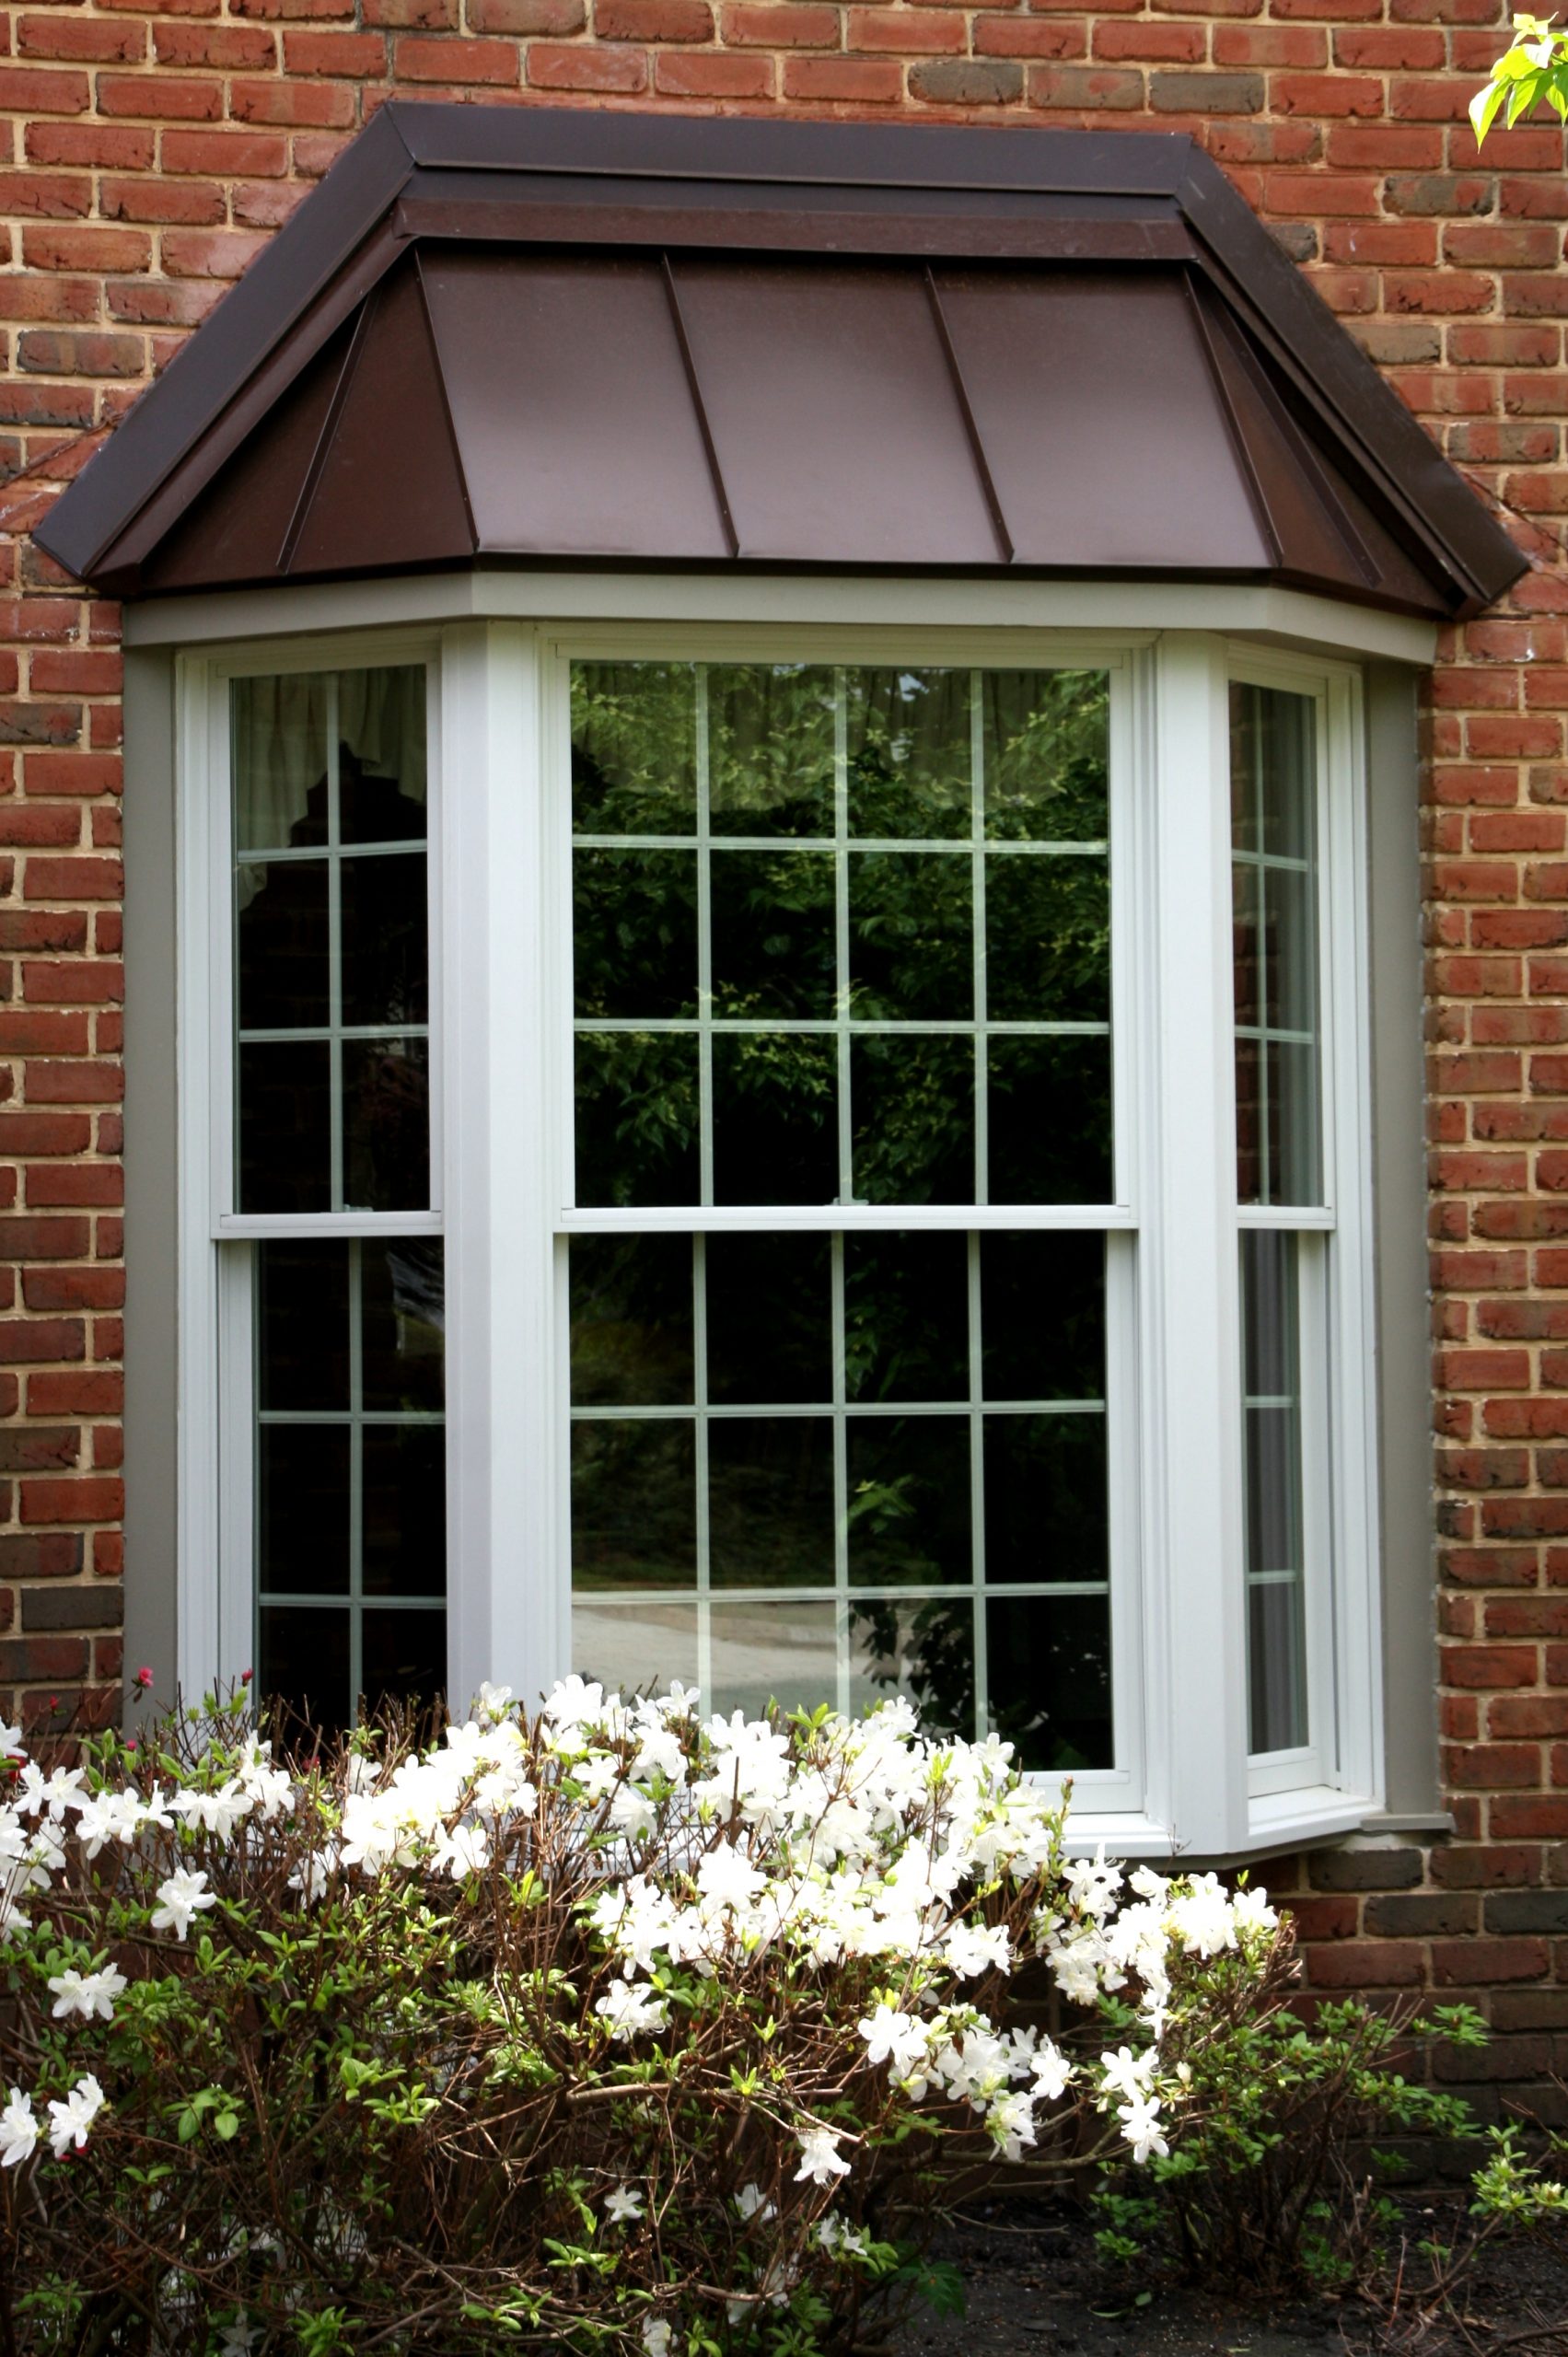 A white bay window with copper roof